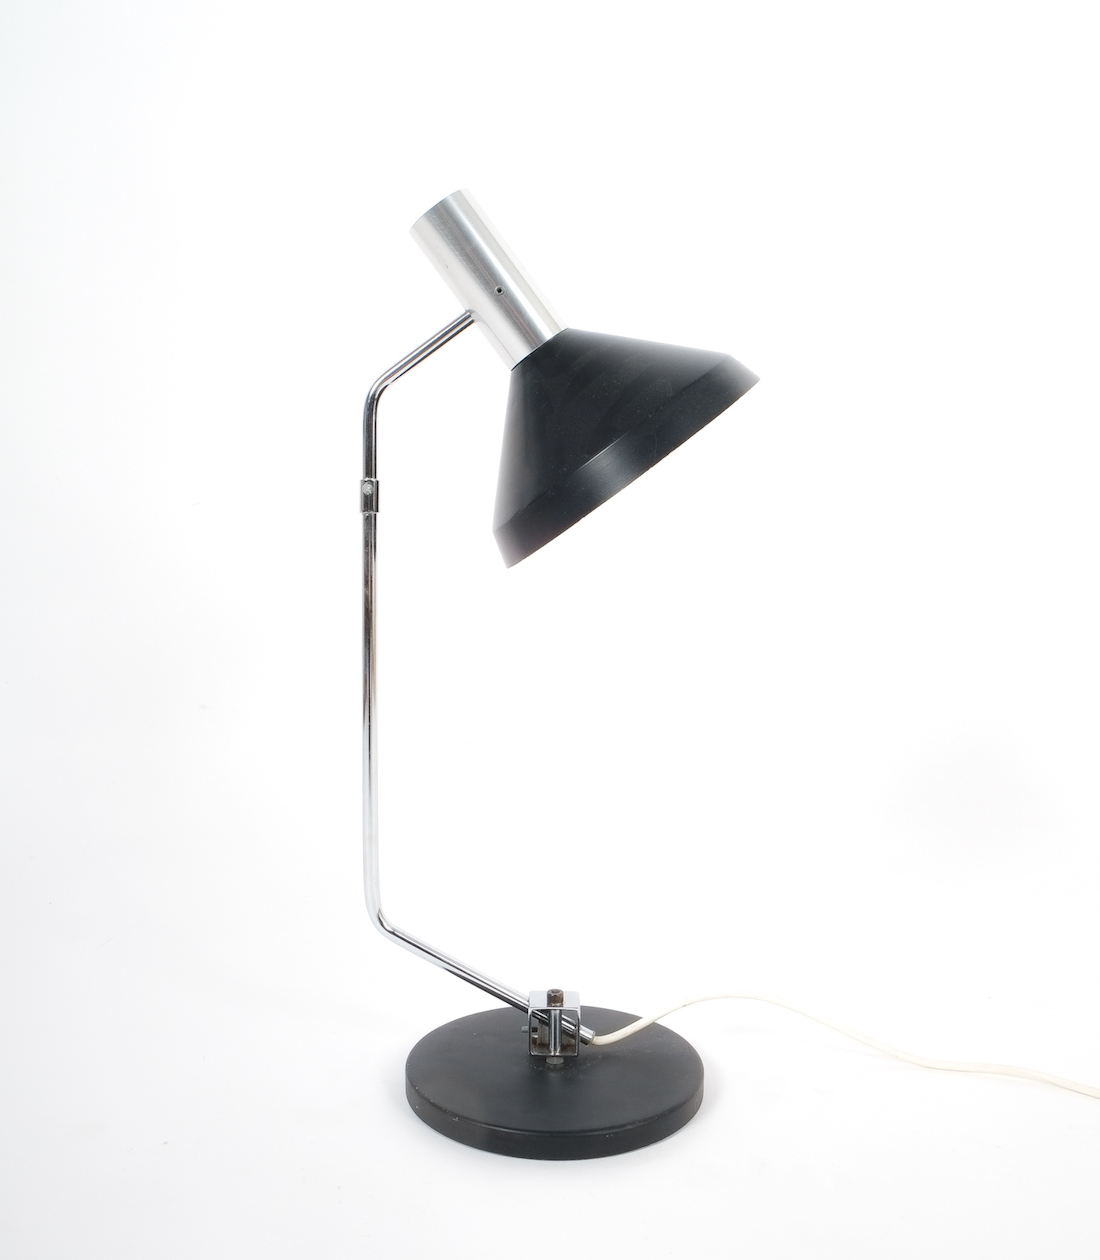 Baltensweiler Articulated Swiss Architects Table Lamp 1960